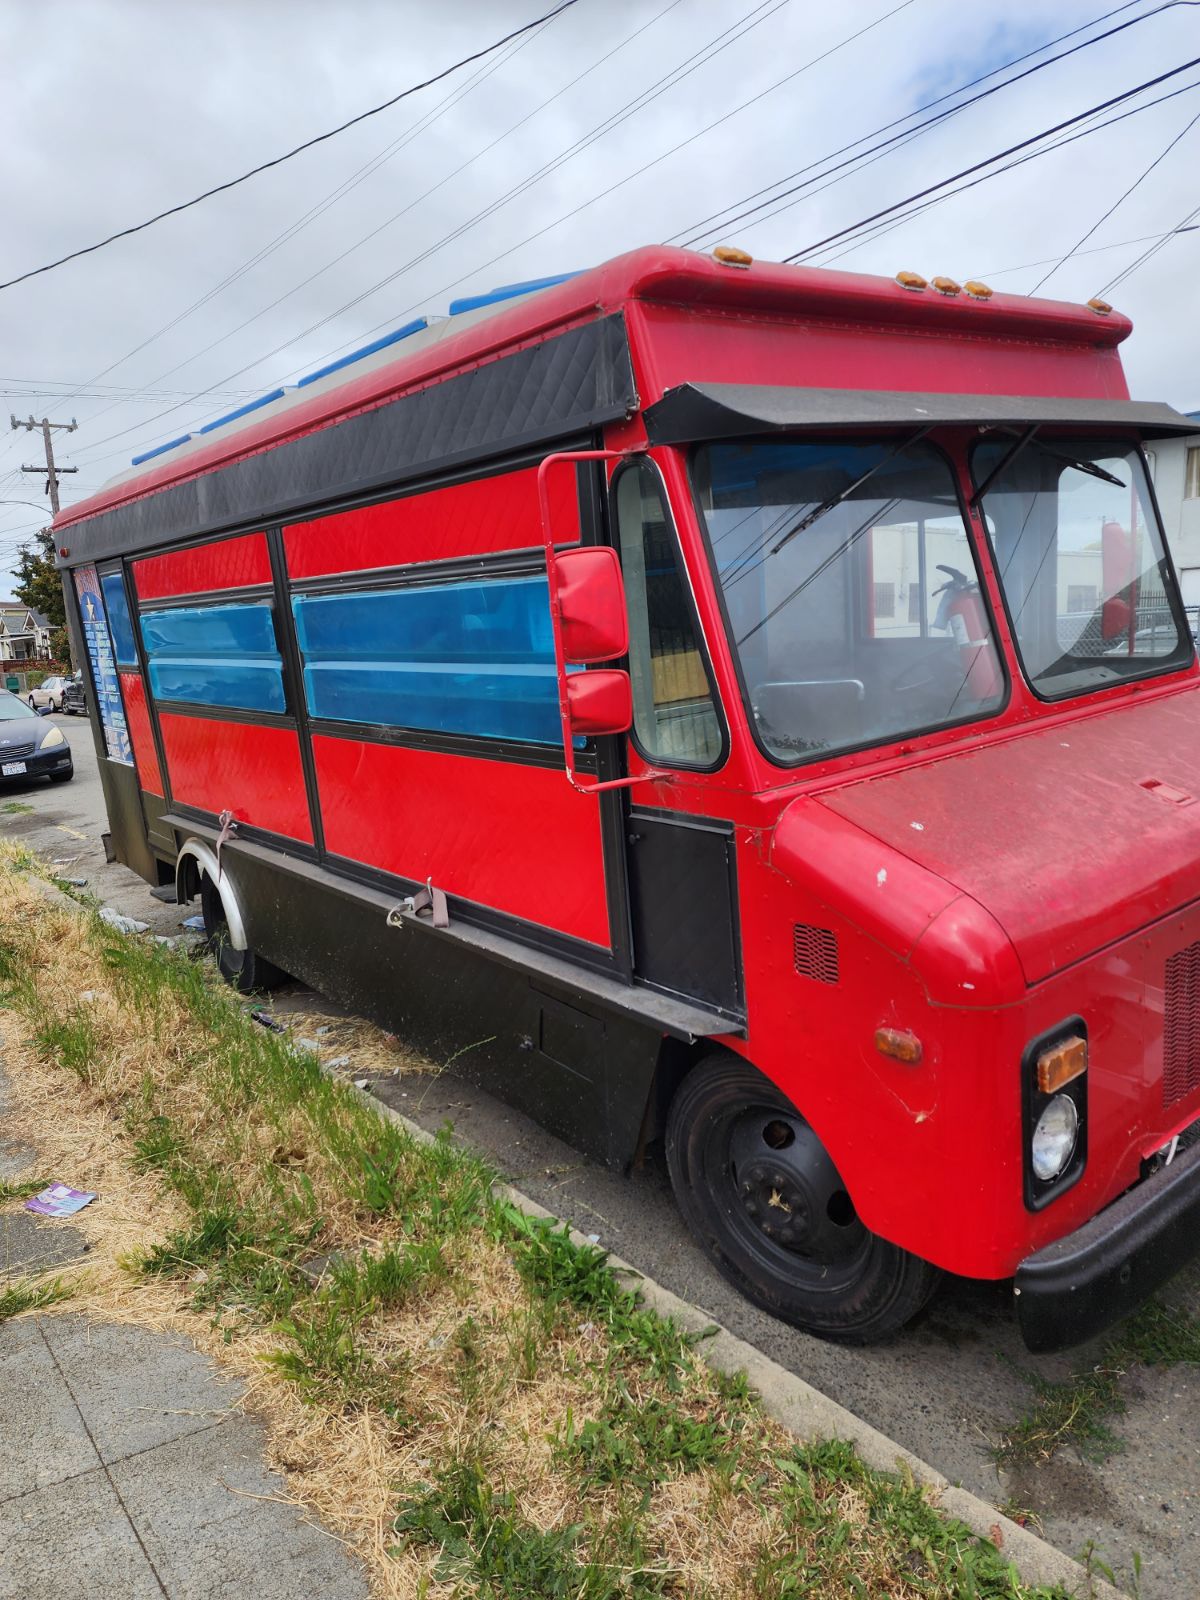 1980 Box Chevy Food Truck (serious Buyers Only!)